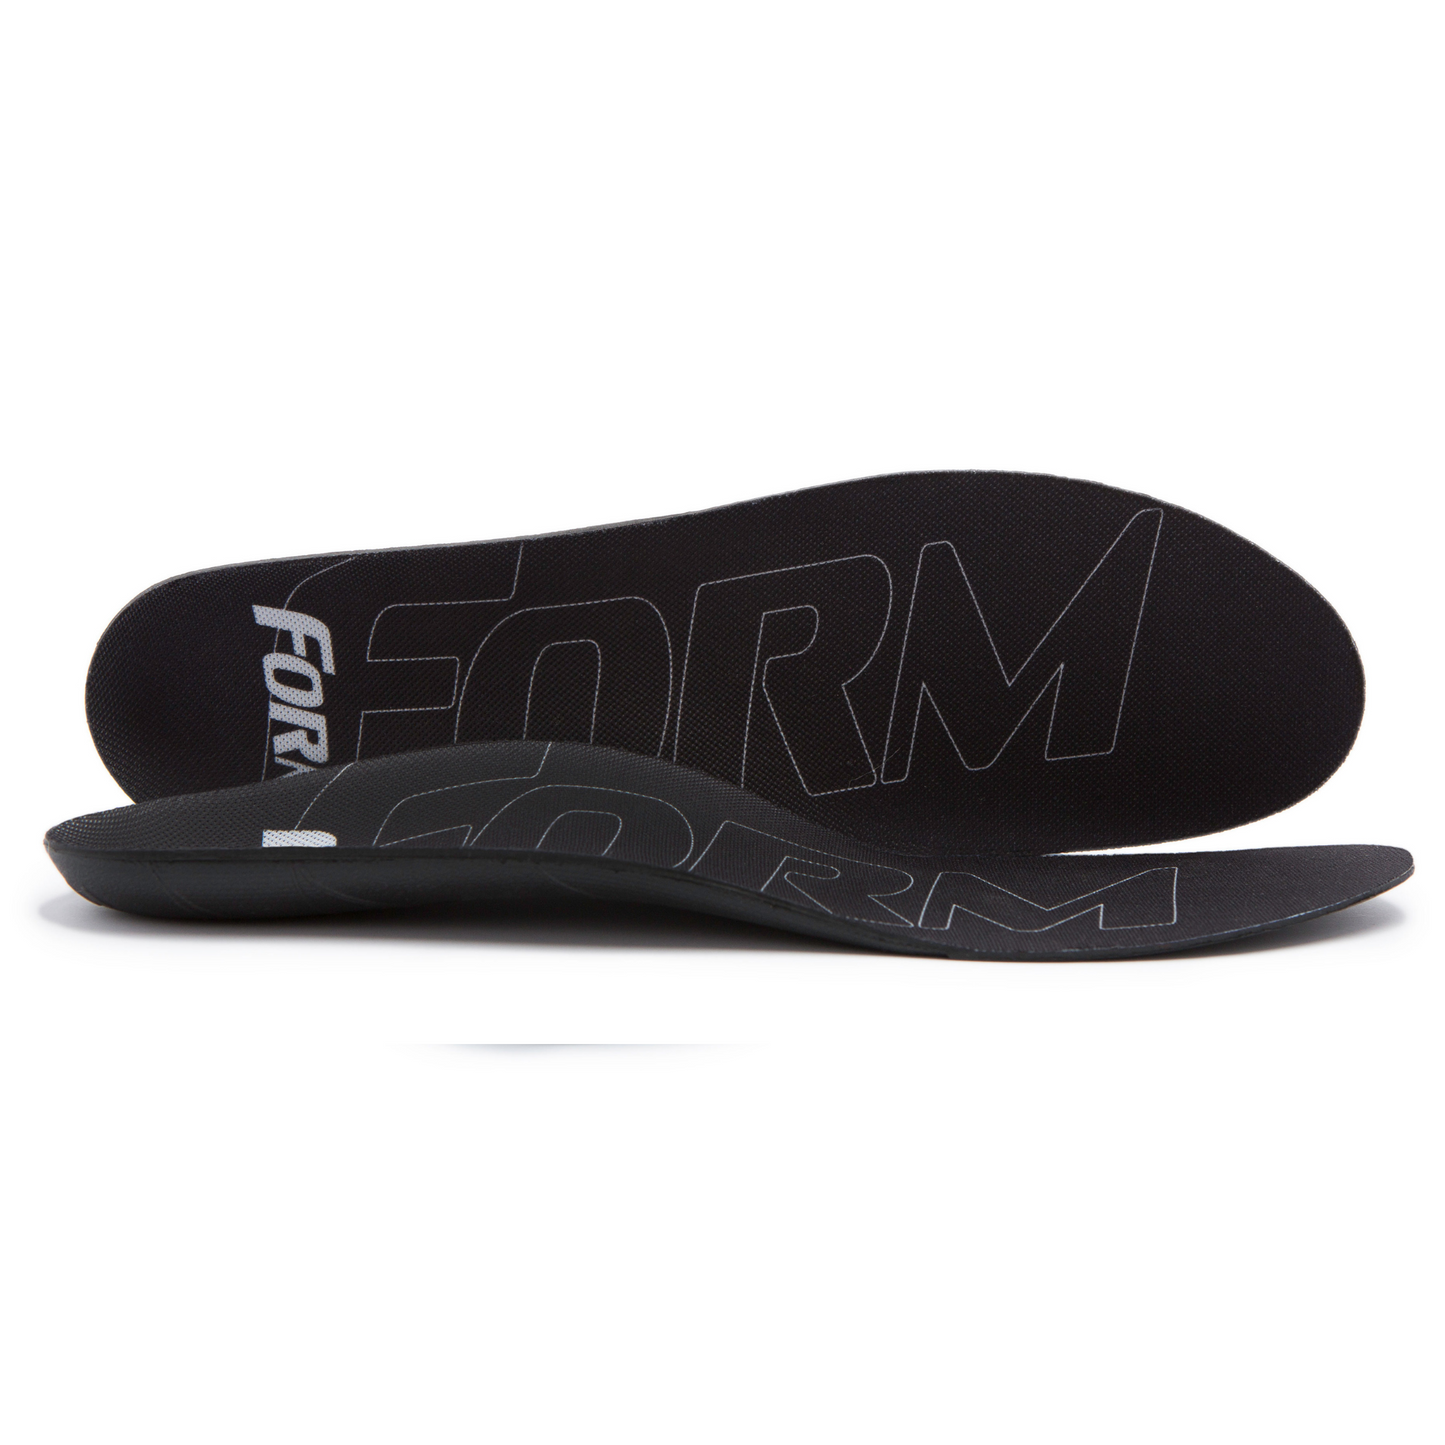 Form Ultra Thin Insole